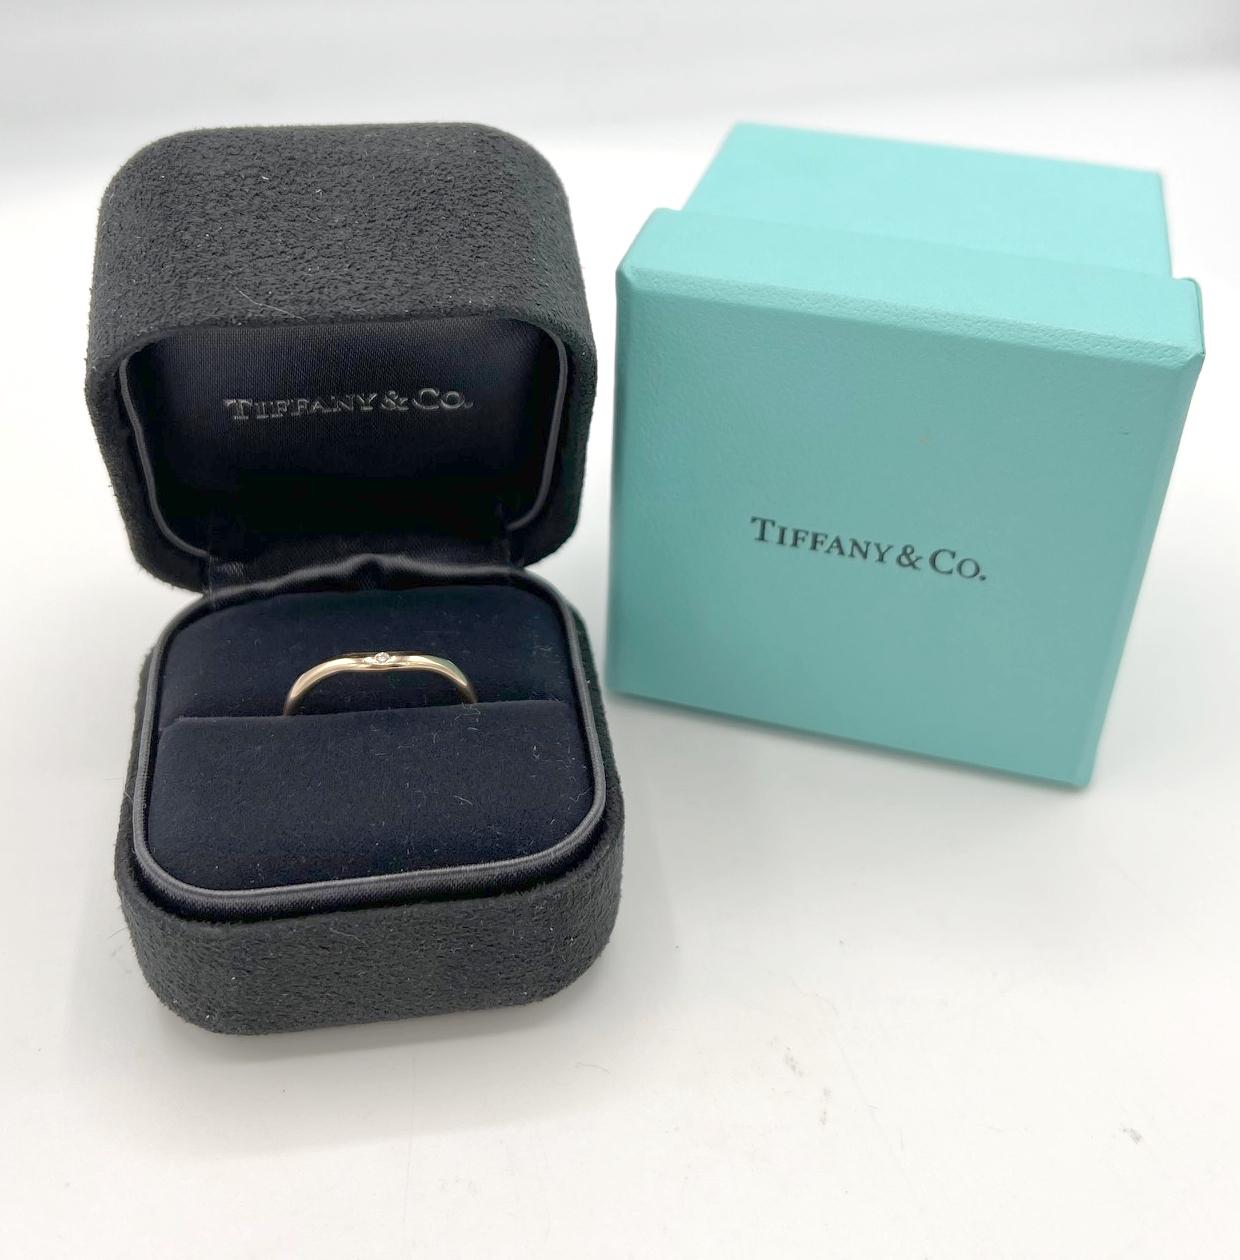 Tiffany & Co. Elsa Peretti 18 Karat Rose Gold Contour Diamond Wedding Band Ring  In Excellent Condition For Sale In  Baltimore, MD